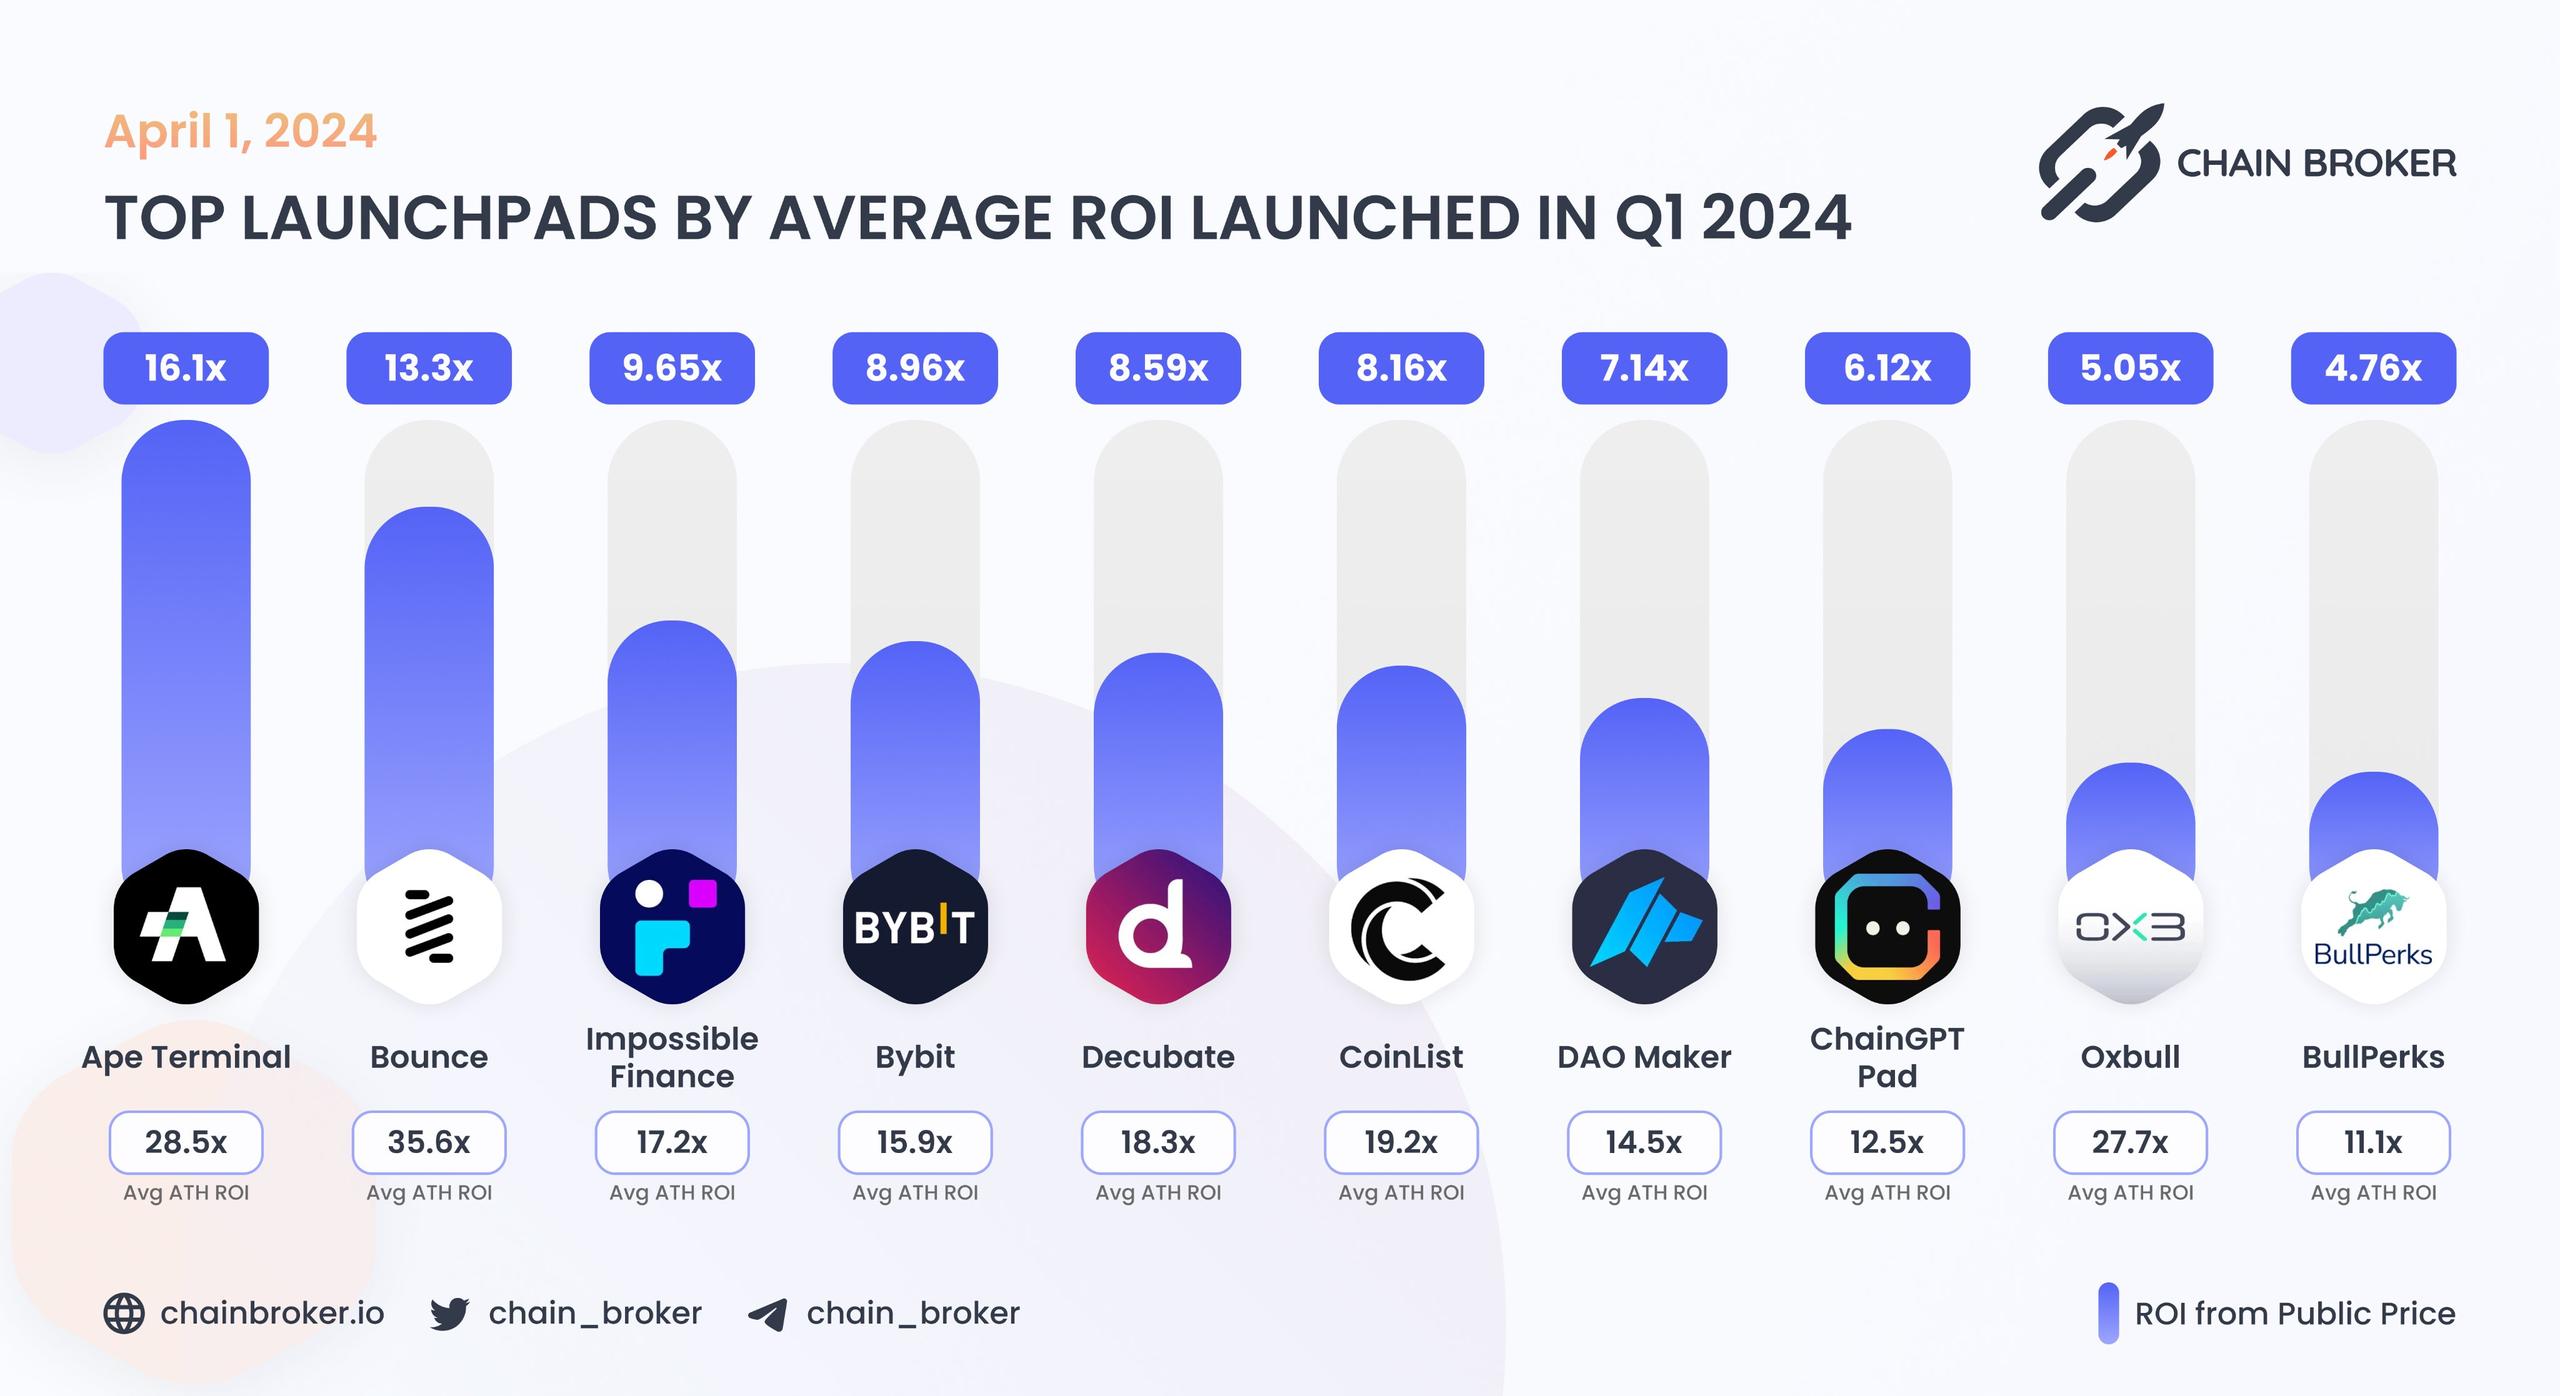 TOP LAUNCHPADS BY AVERAGE ROI IN Q1 2024